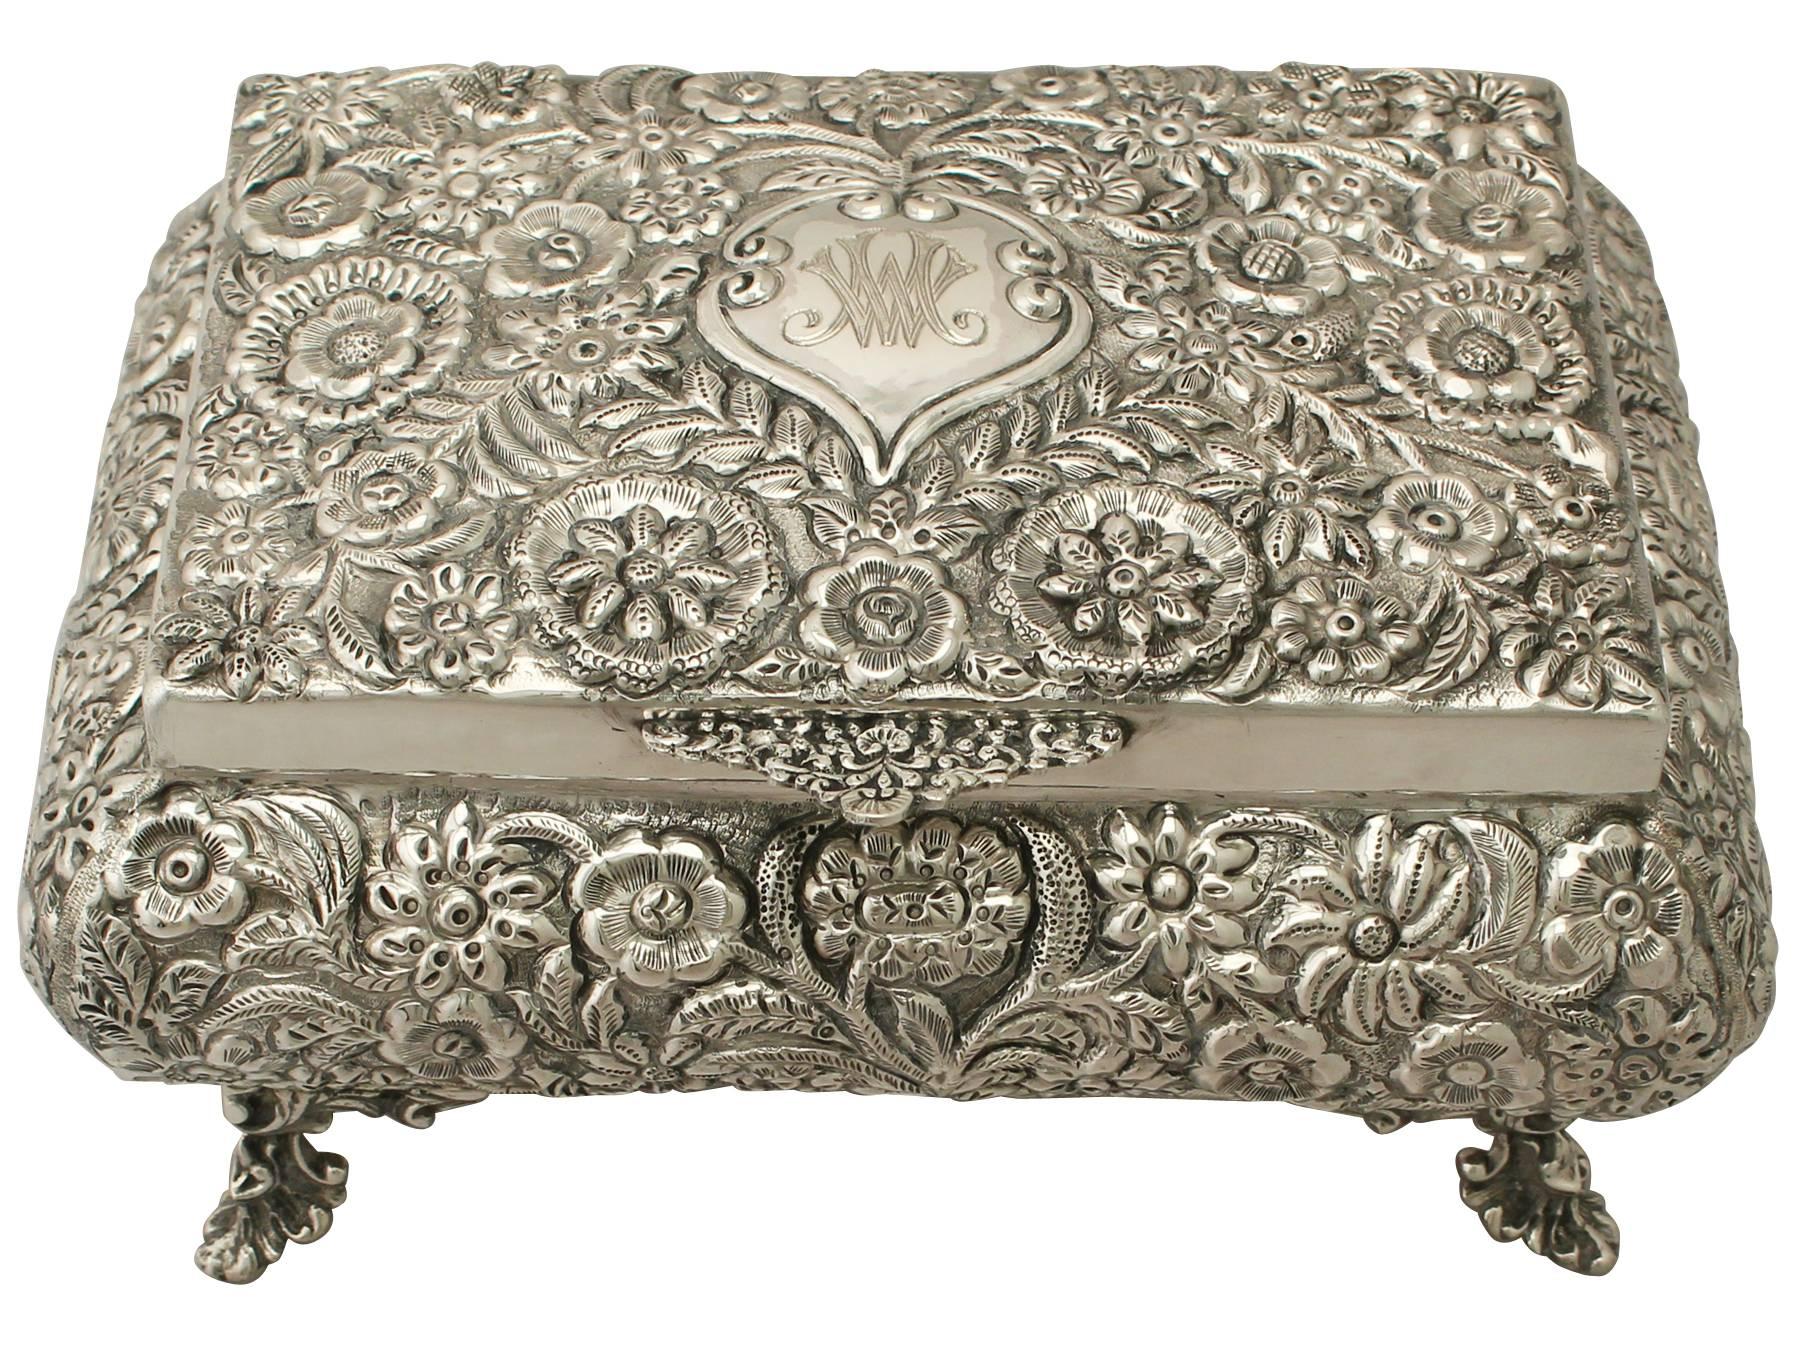 An exceptional, fine and impressive vintage Egyptian silver jewelry casket in the antique style; an addition to our ornamental silver collection

This exceptional vintage Egyptian silver jewelry casket has a rectangular rounded form, in the